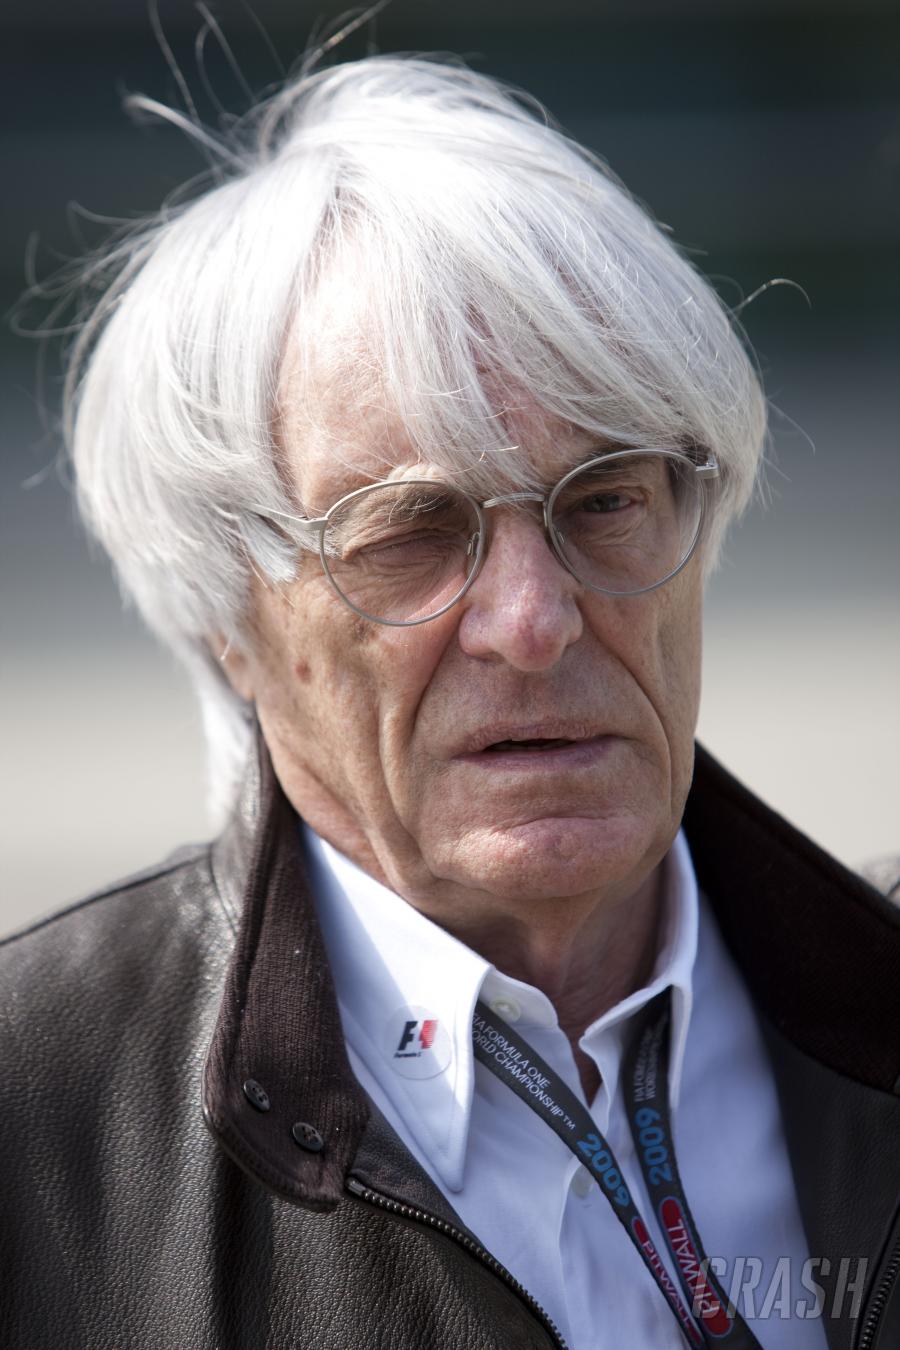 Ecclestone's F1 Group more costeffective than FTSE 100 leaders F1 News